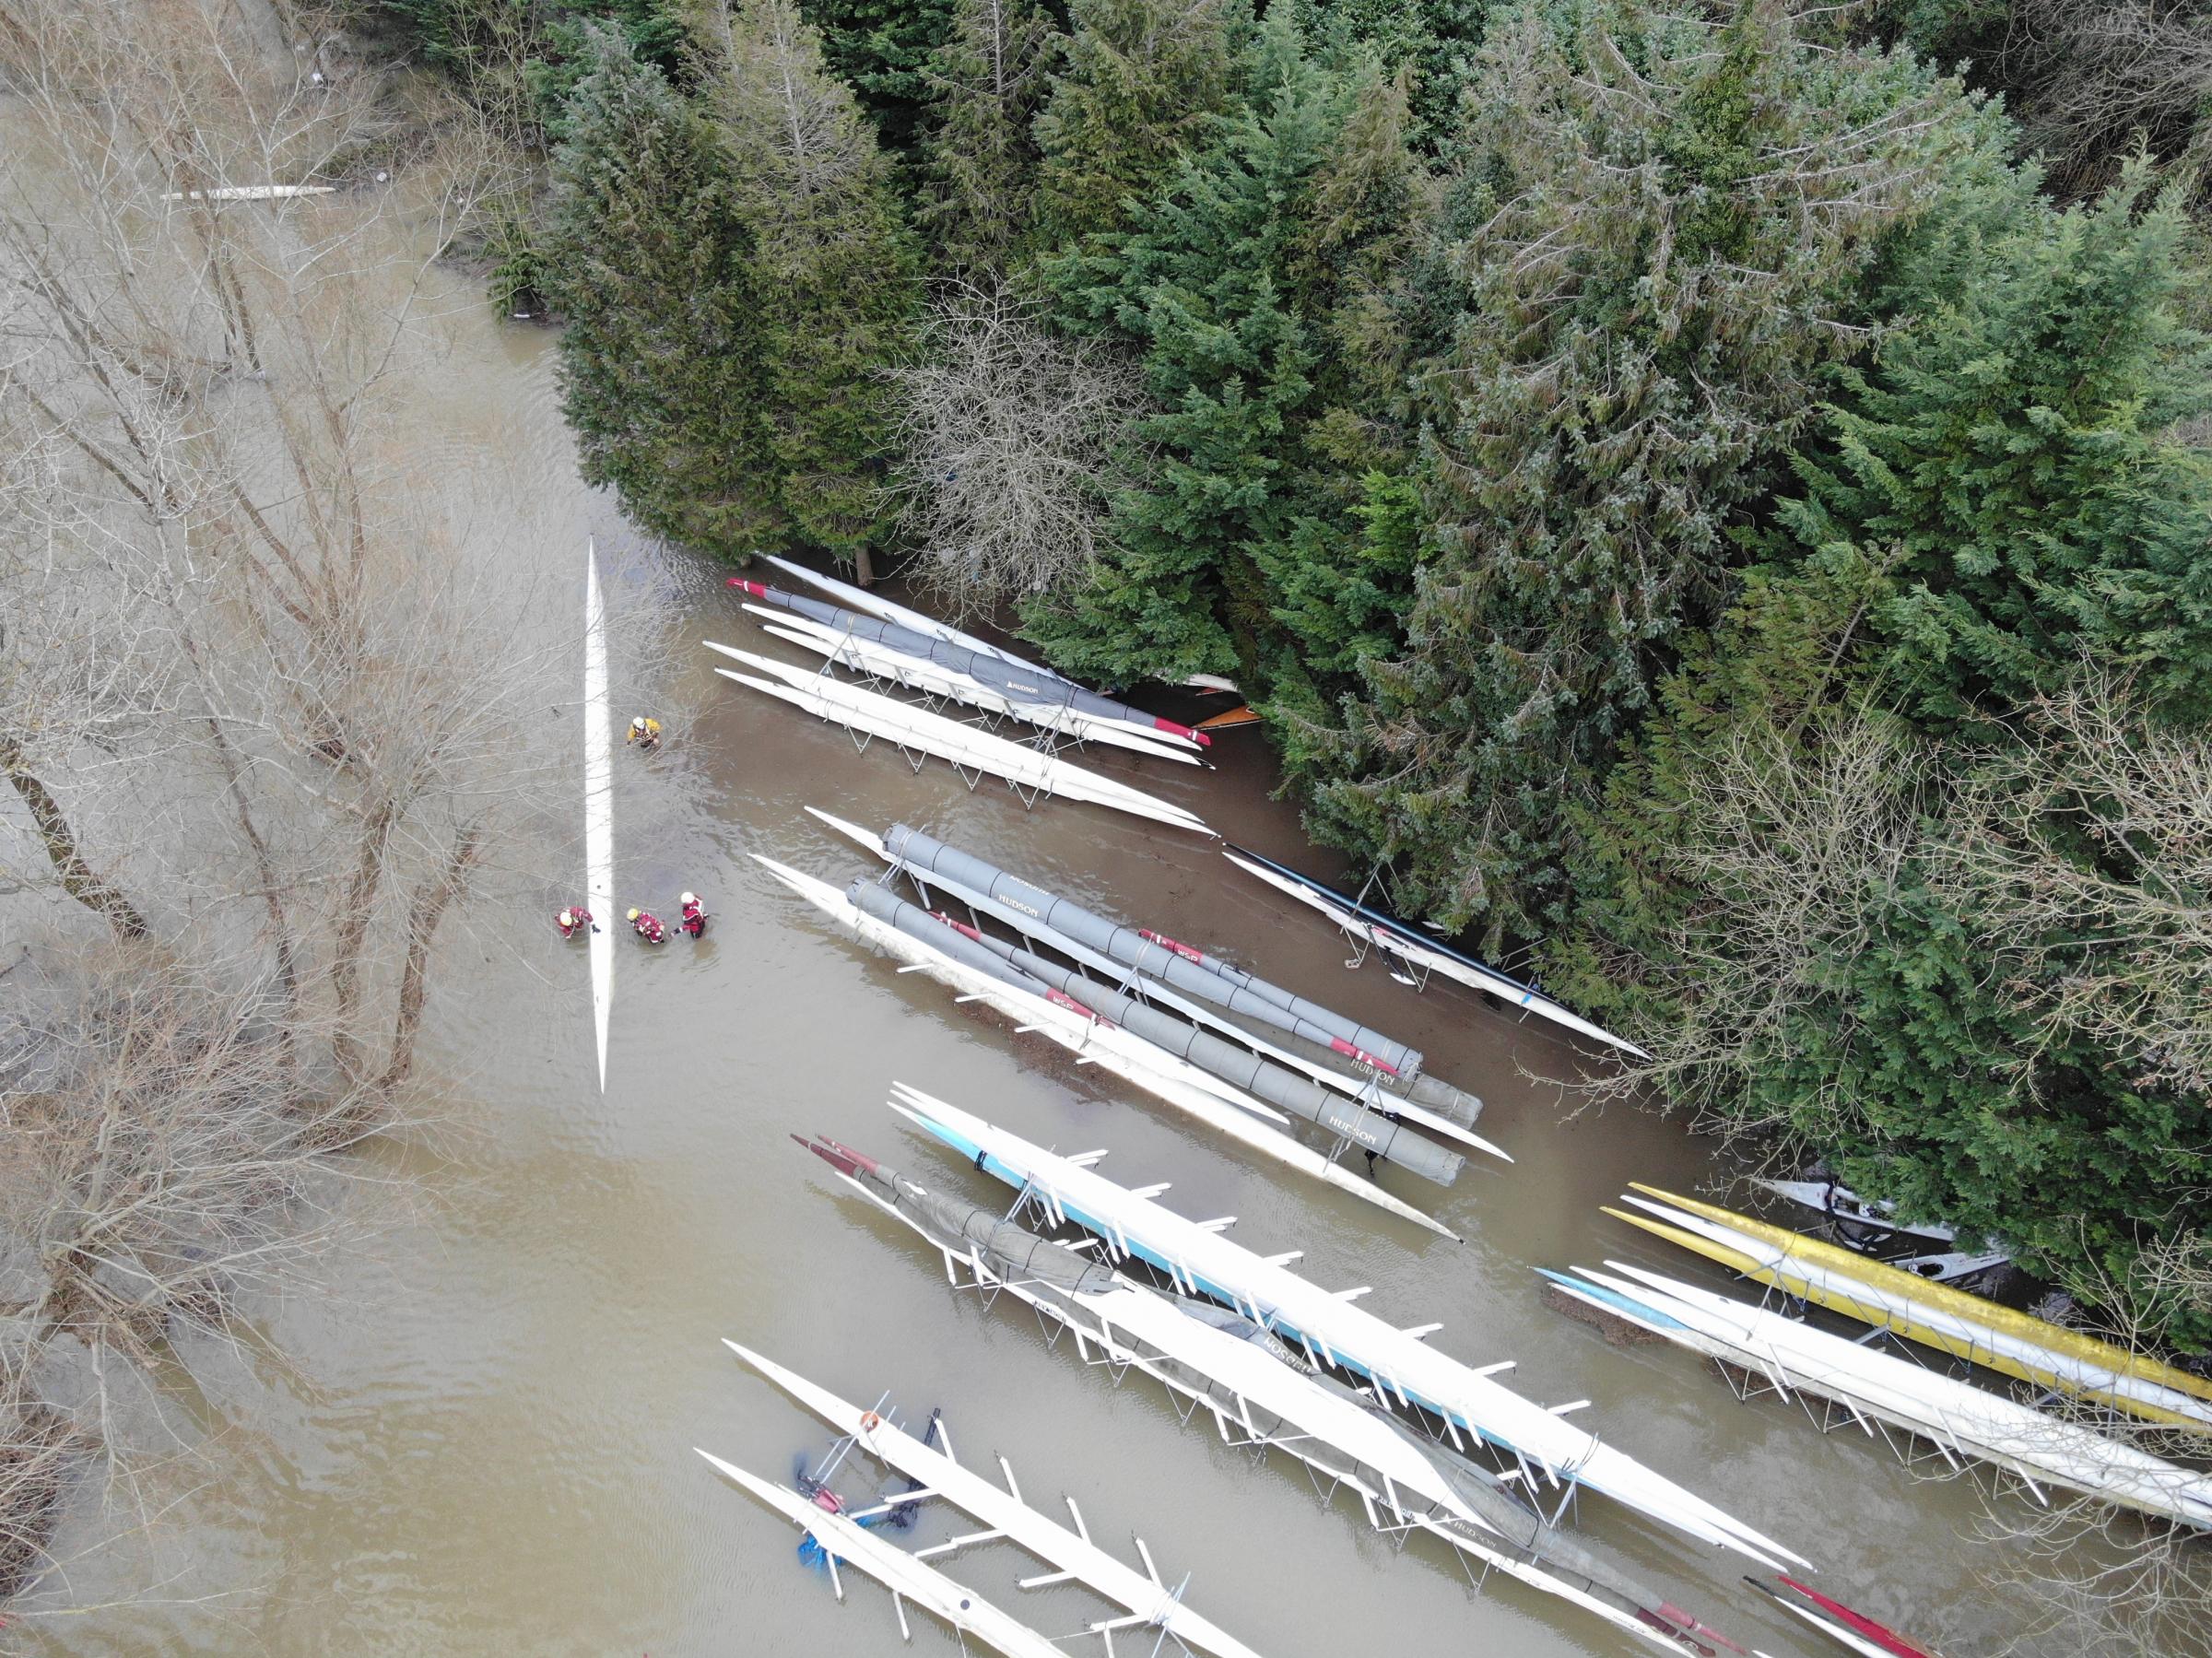 The canoes that had broken their mooring (Bucks Search And Rescue)